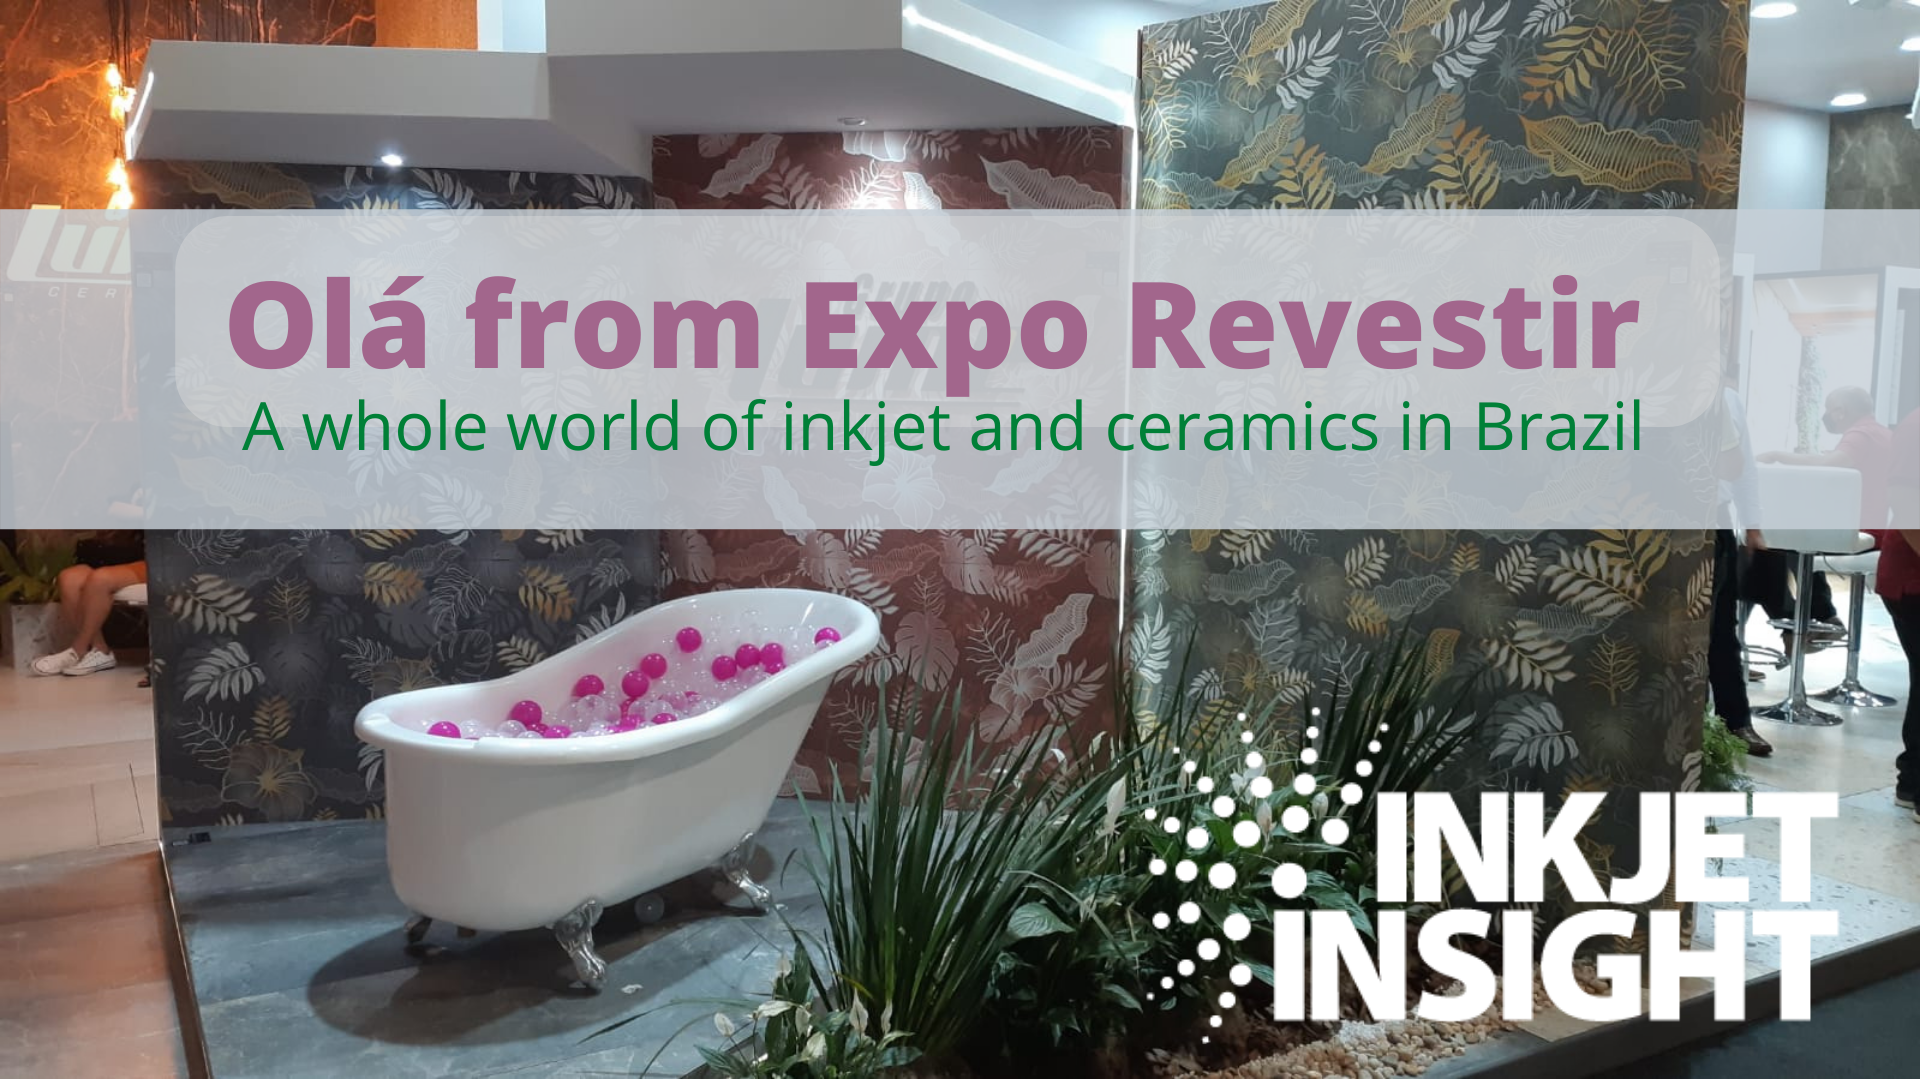 Featured image for “Olá from Expo Revestir with Ceramics and Inkjet in Attendance”